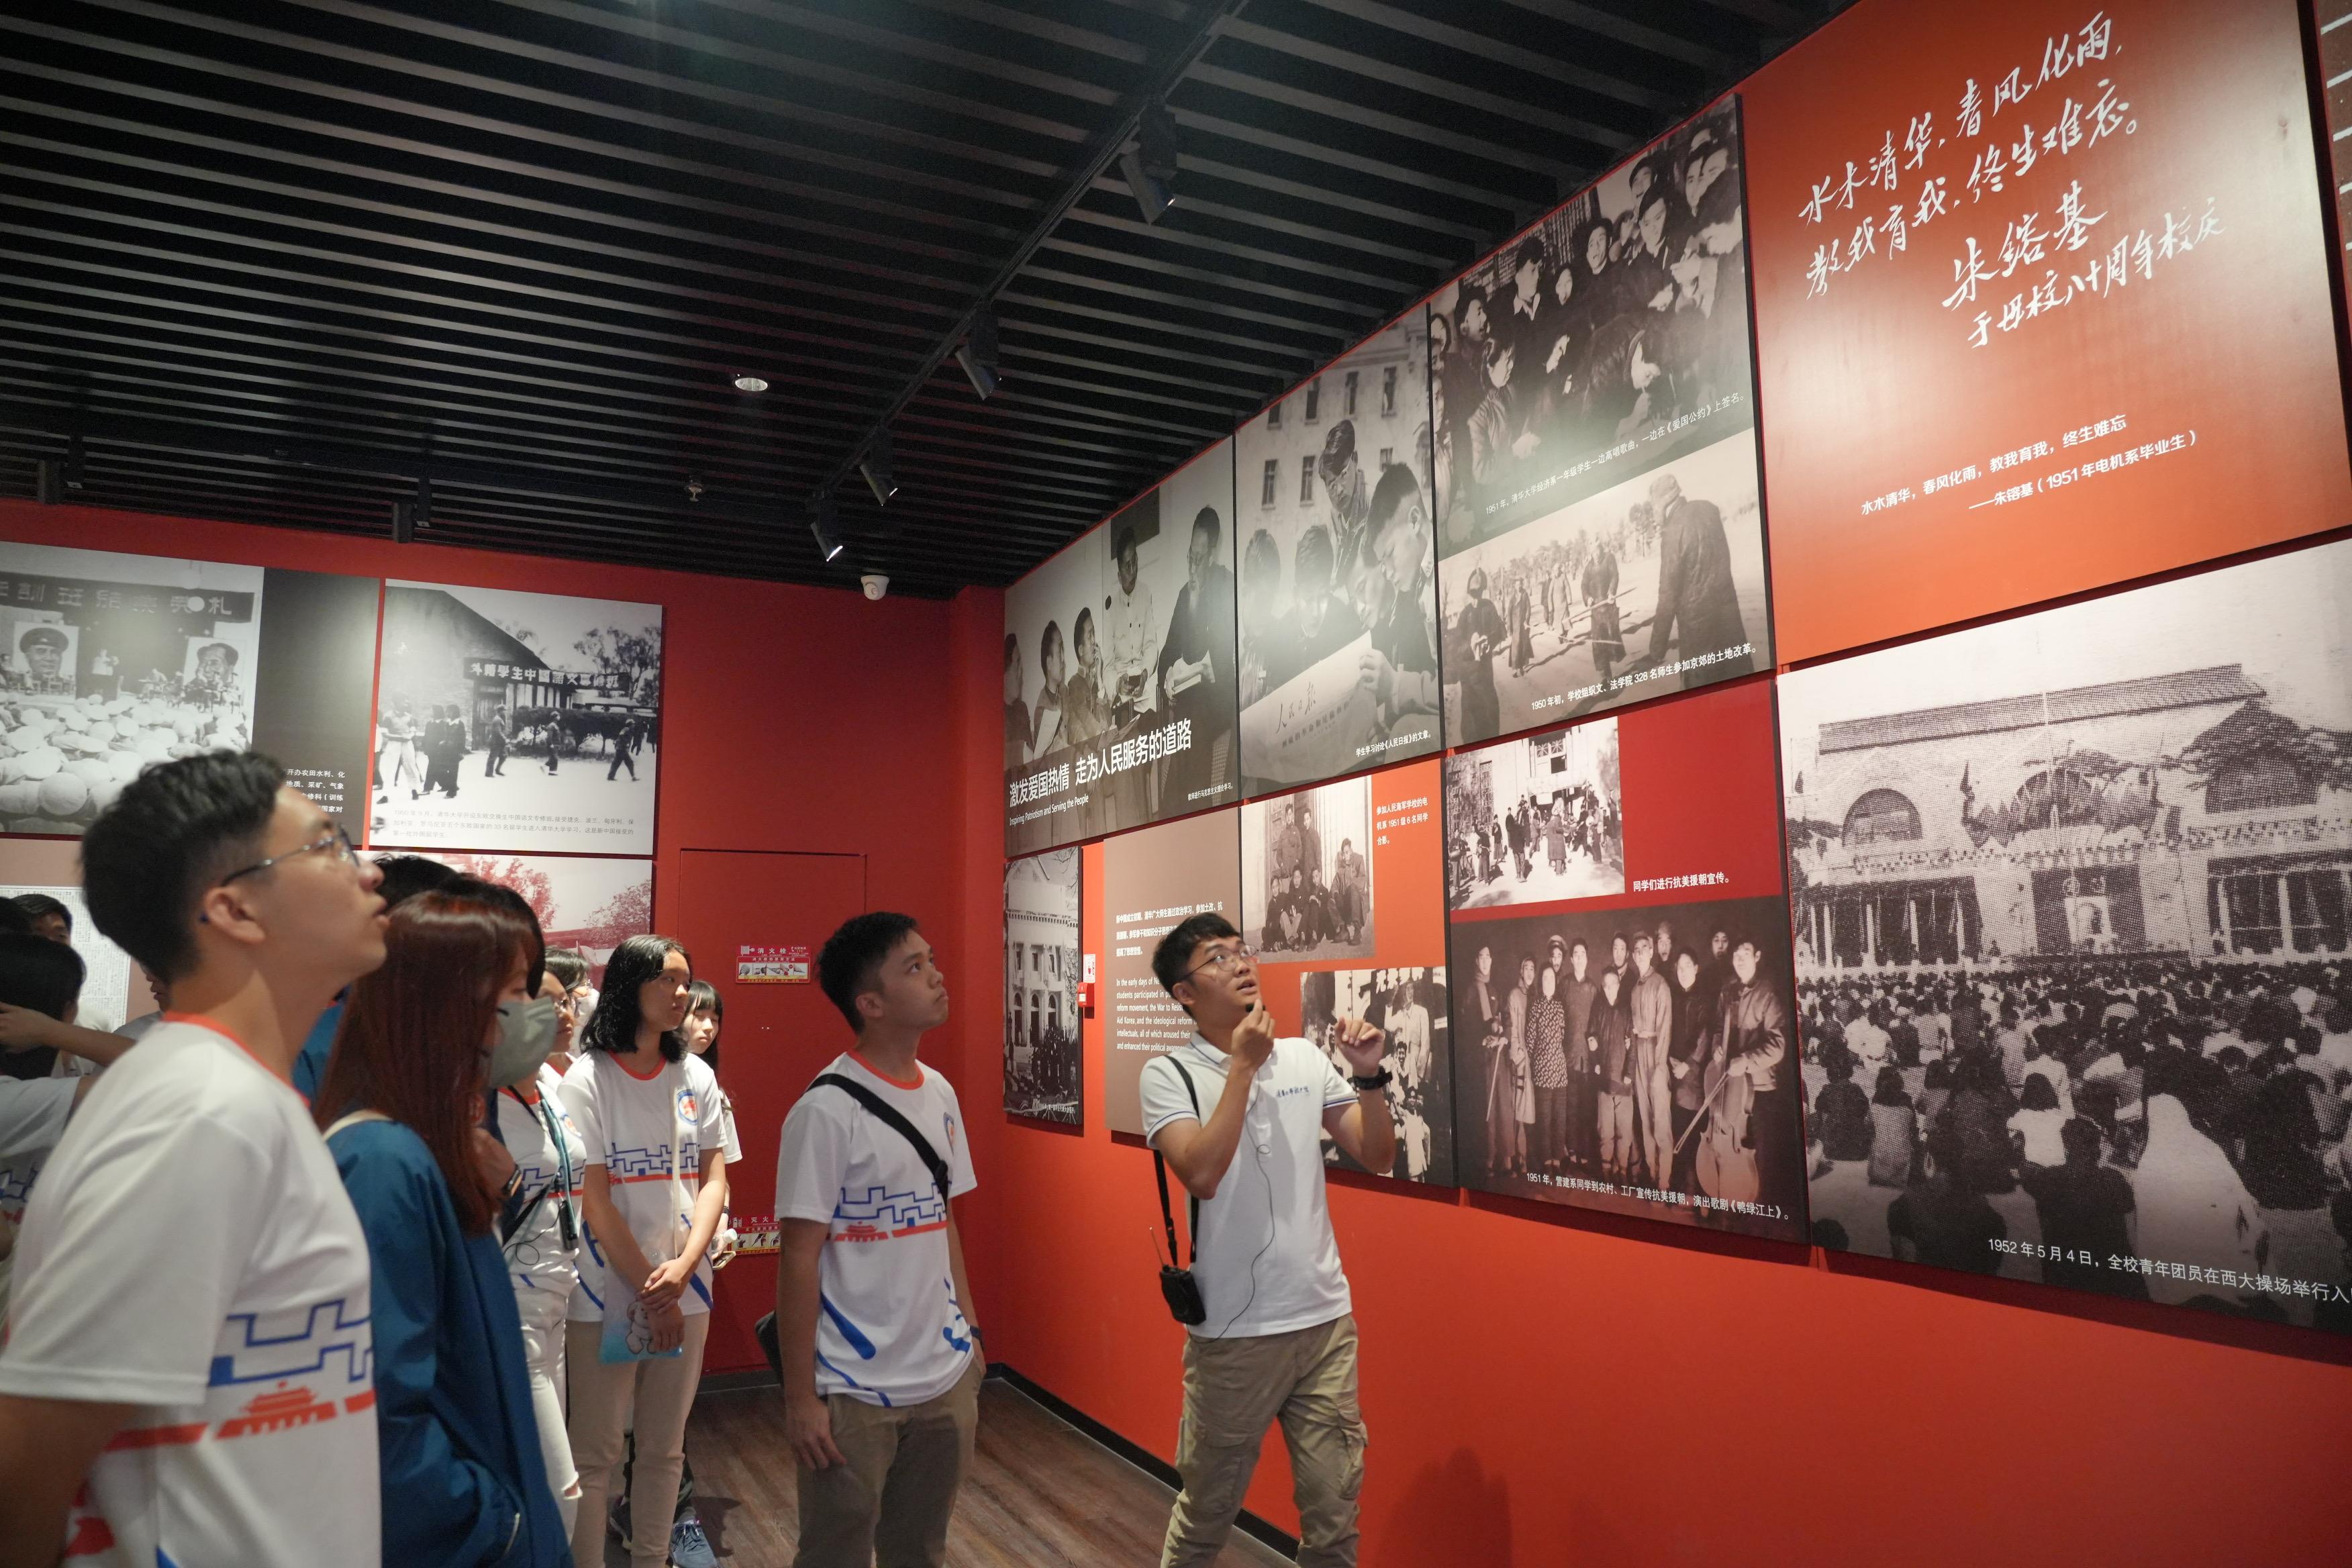 Secretary for Security, Mr Tang Ping-keung, led members of the Security Bureau Youth Uniformed Group Leaders Forum to continue visit to Beijing. Photo shows youth group members touring Tsinghua University's History Museum on August 20.